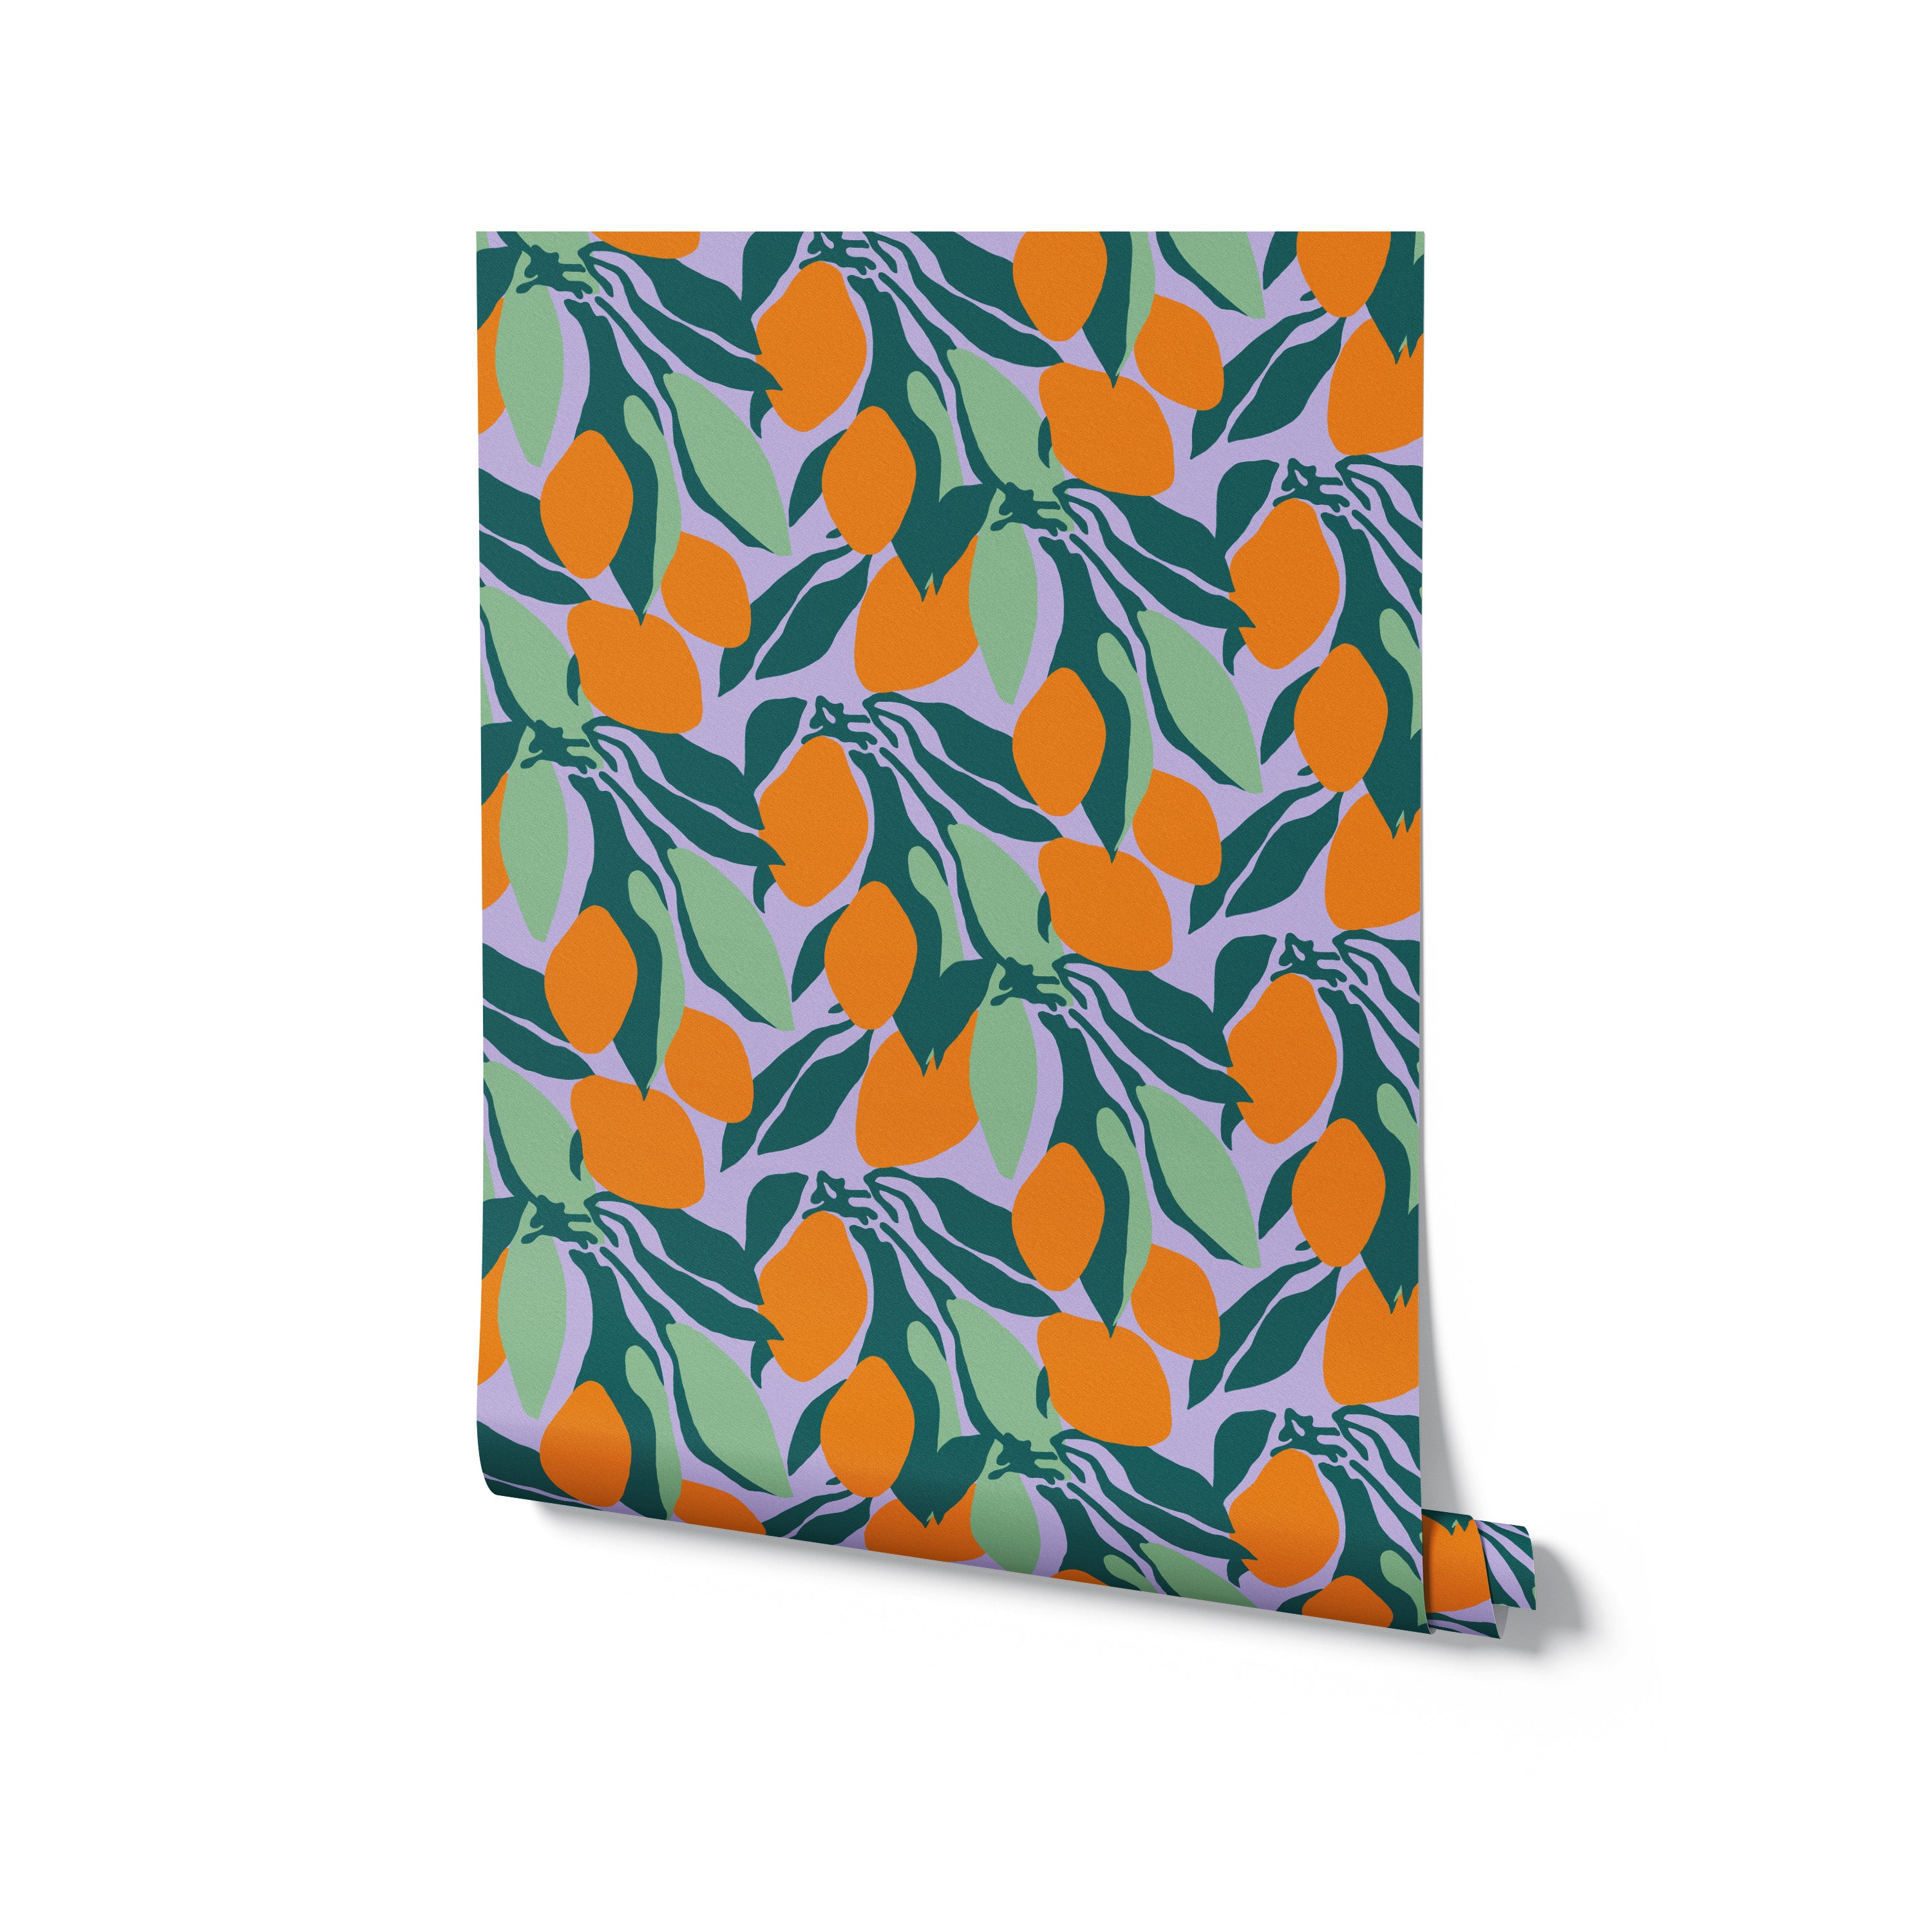 A roll of wallpaper depicting a colorful pattern of orange fruits and green leaves on a purple background. The design is bright and playful, suitable for adding a lively touch to any room decor